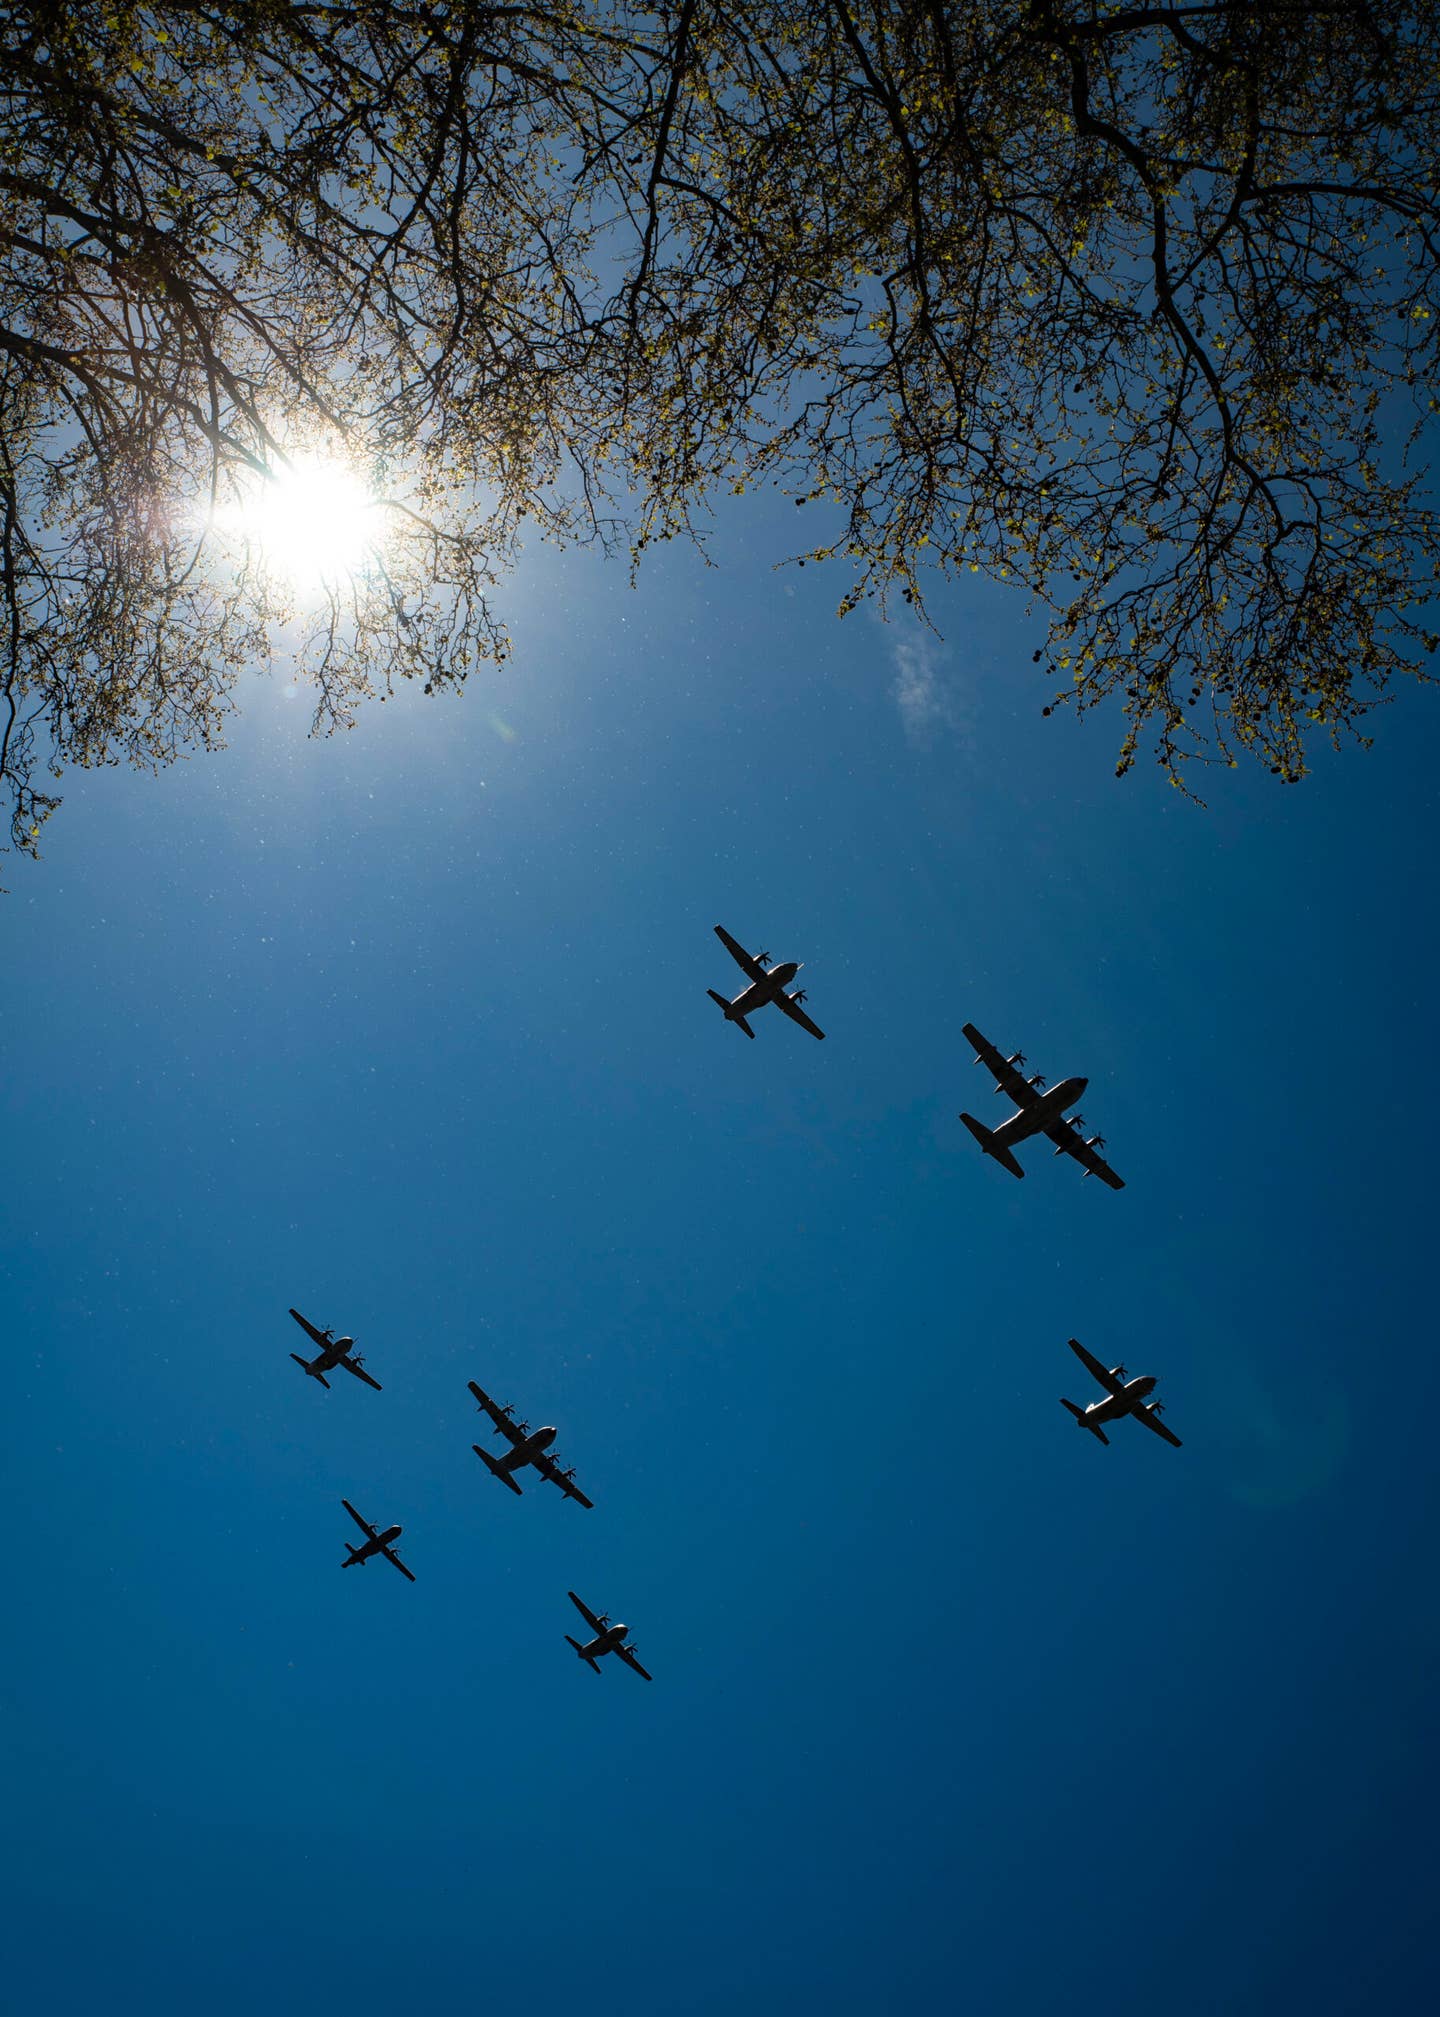 Italian Air Force turboprops in formation over Rome. The C-130J and C-27J transports are followed by a single P-72 maritime patrol aircraft. <em>Daniele Faccioli </em>